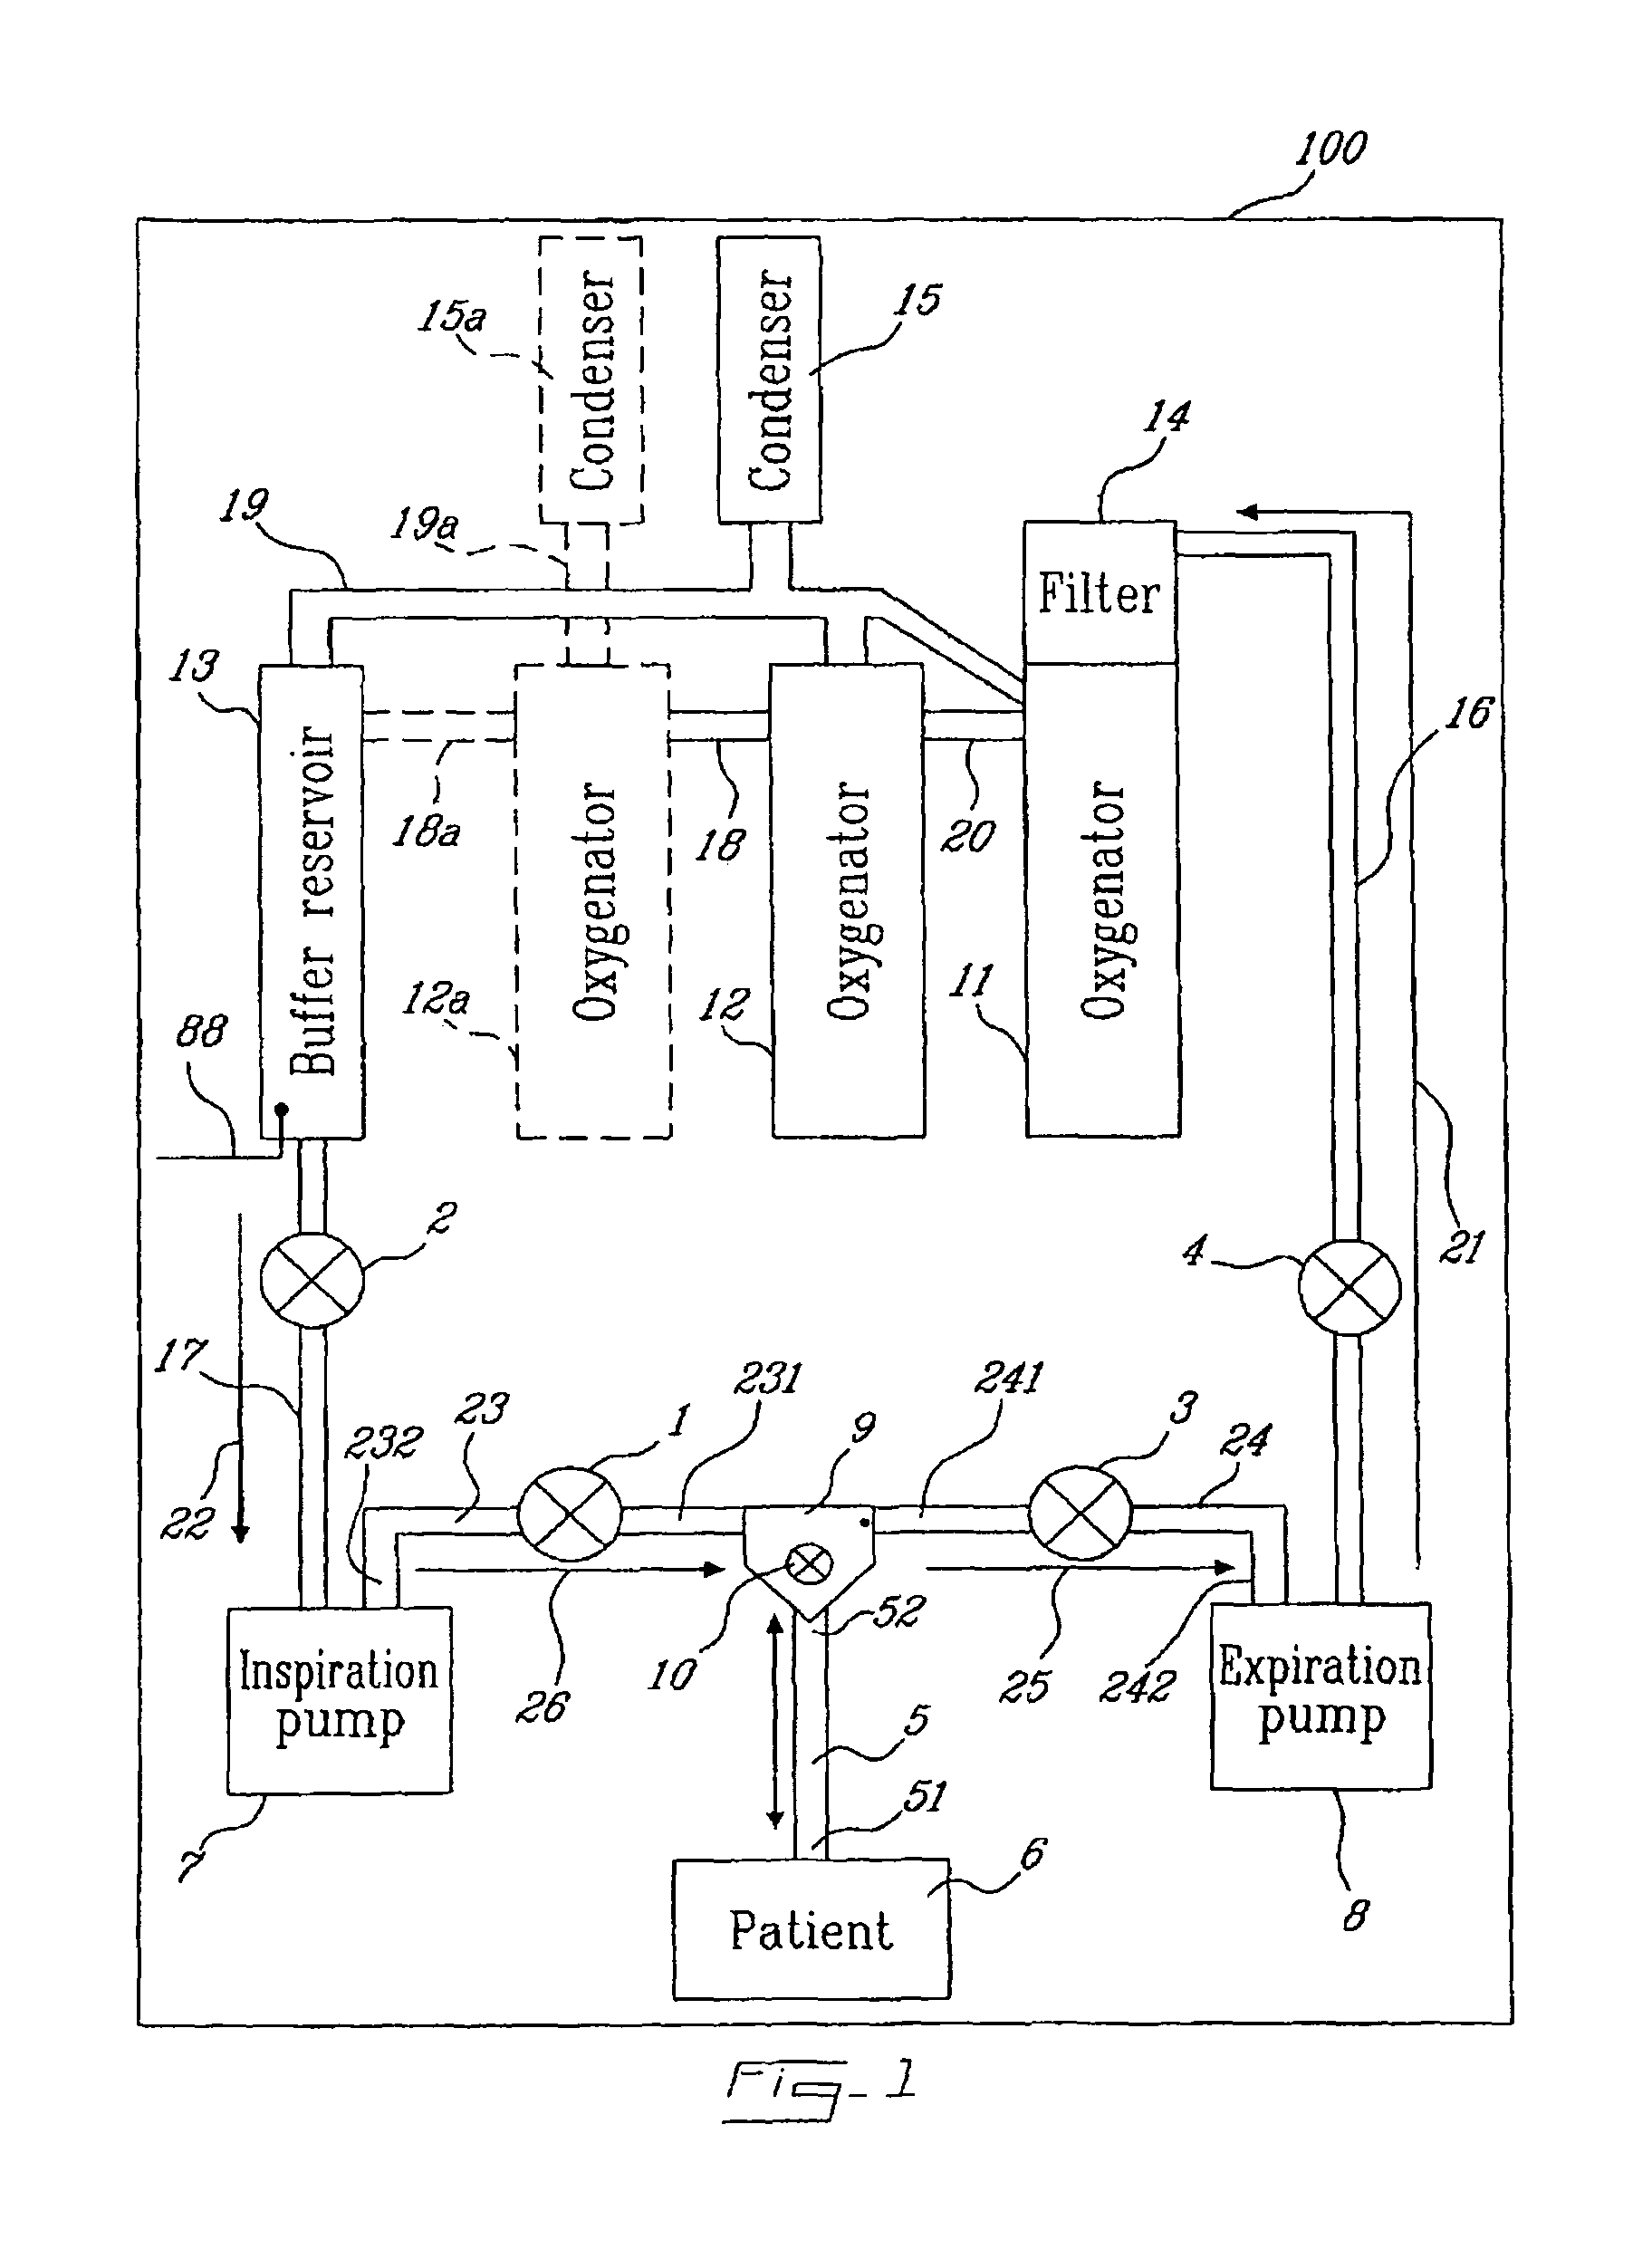 Method and apparatus for conducting total liquid ventilation with control of residual volume and ventilation cycle profile